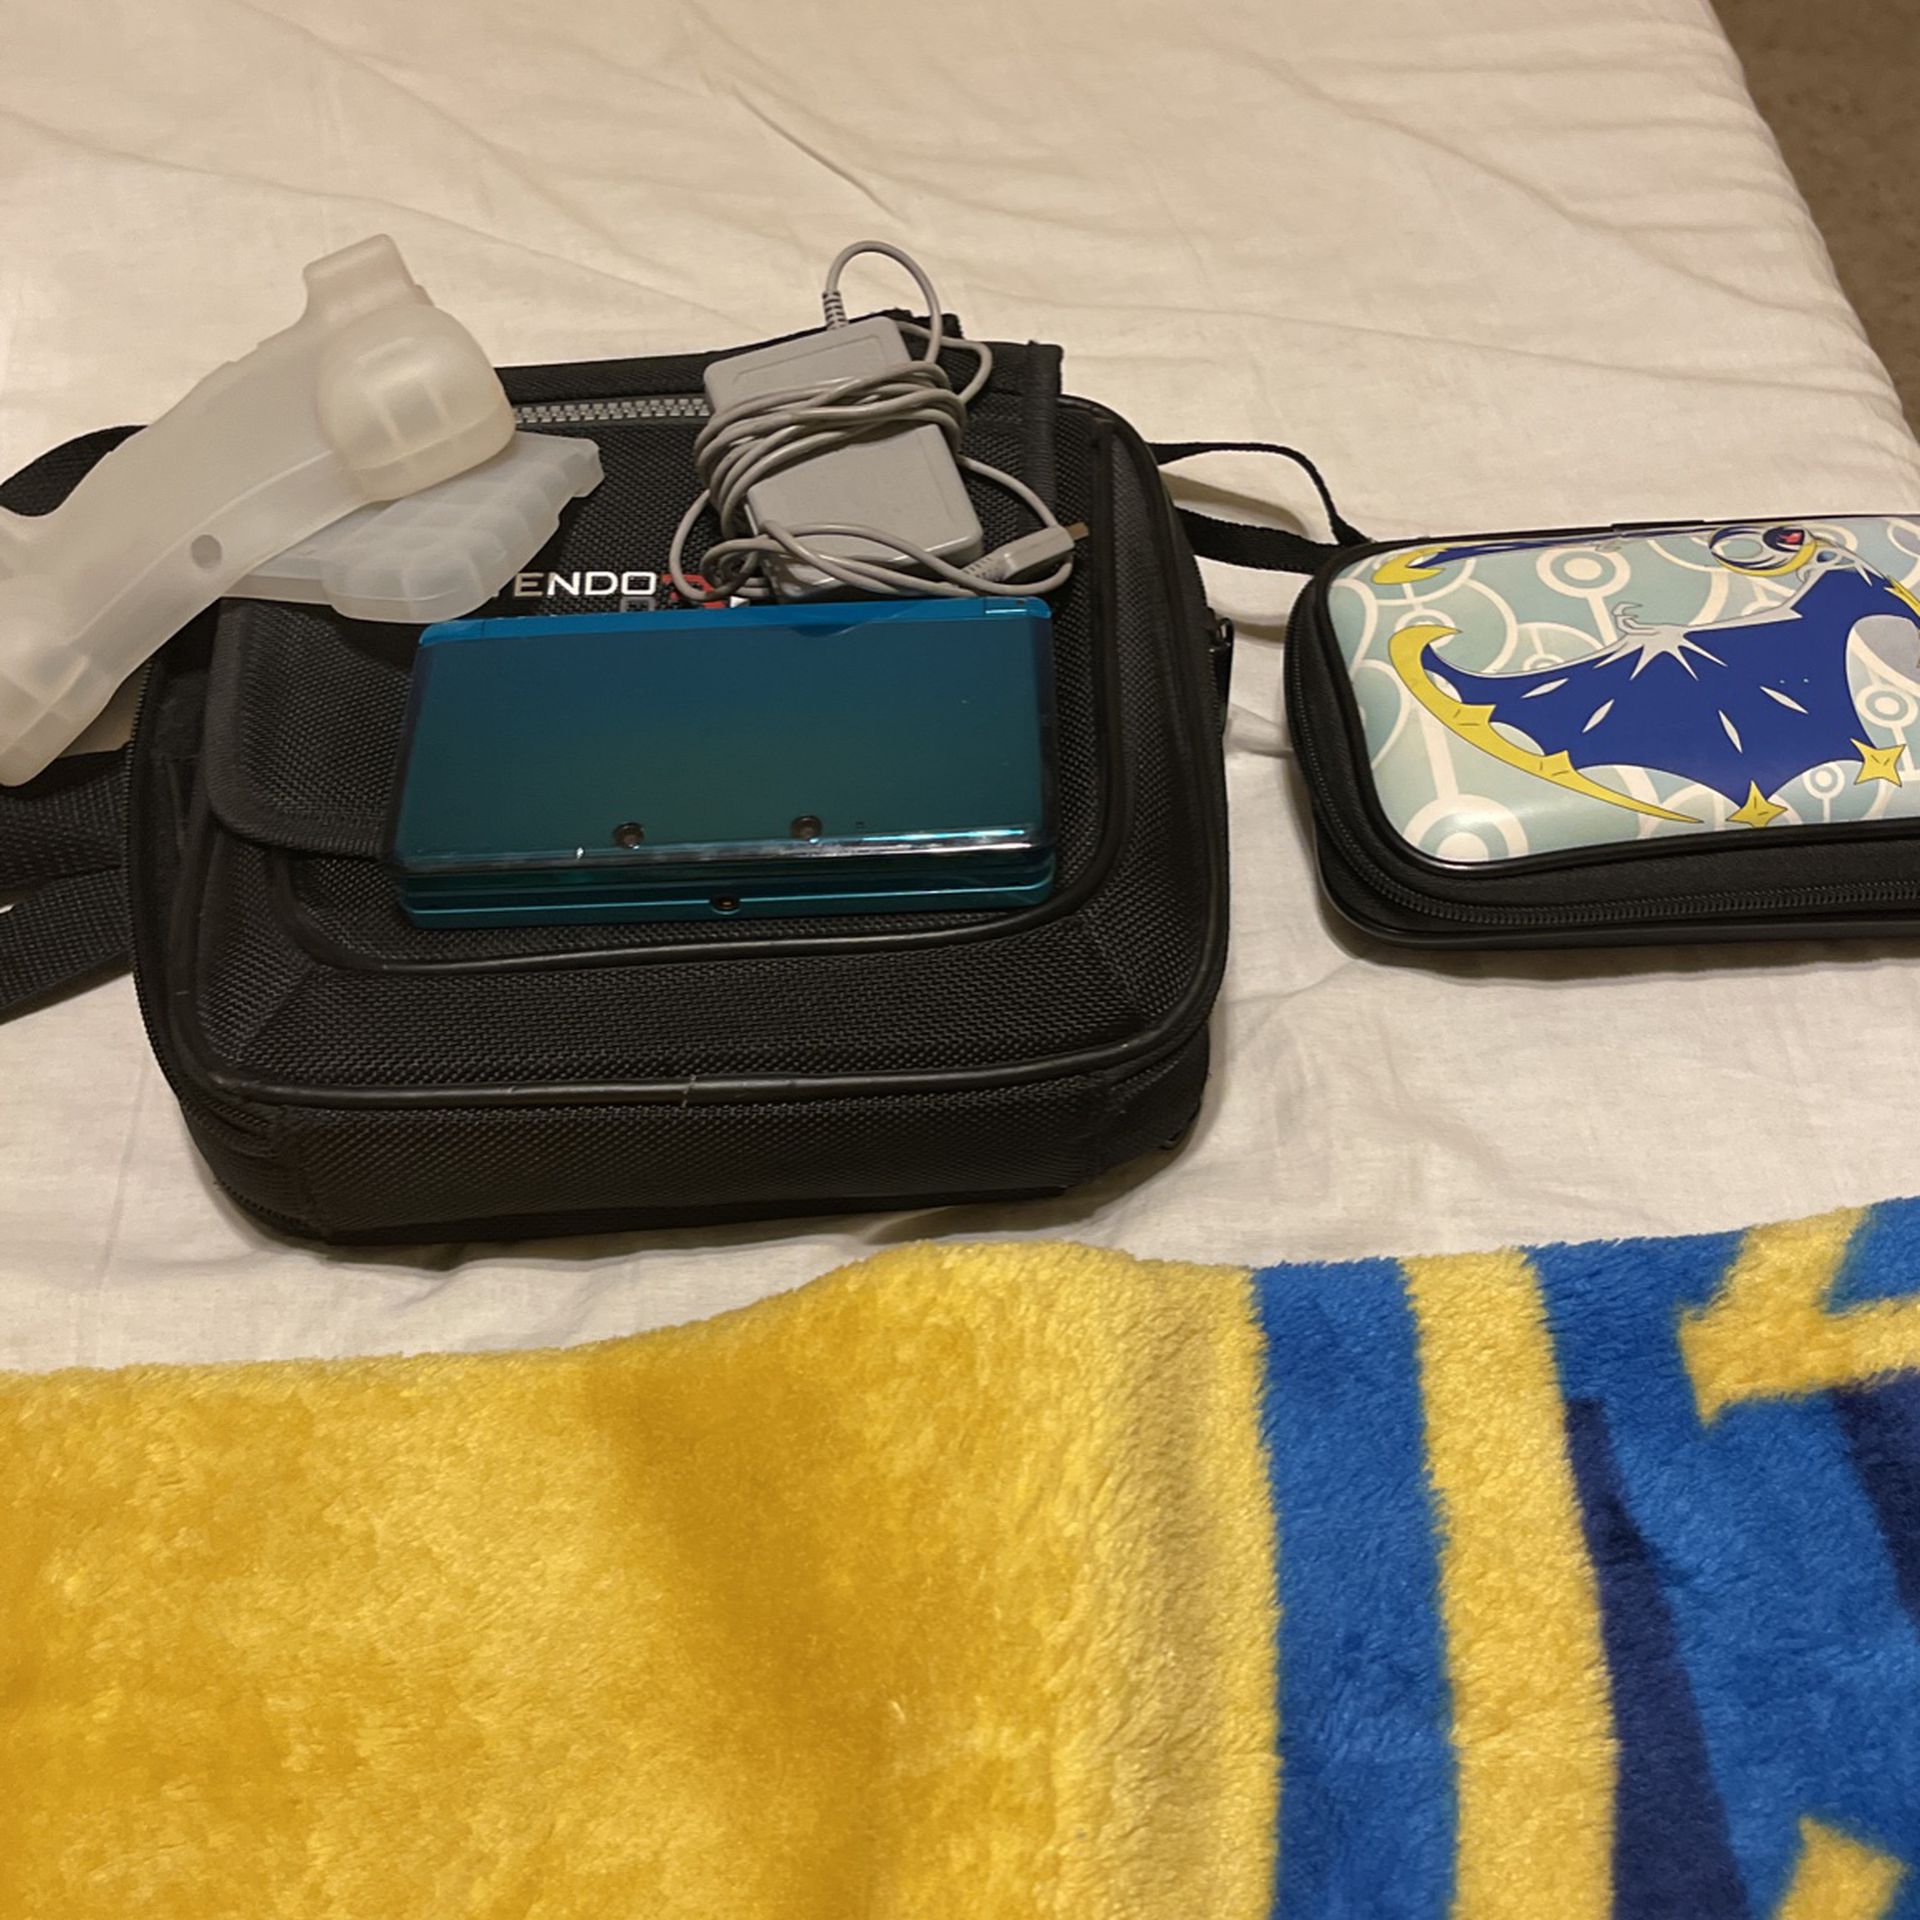 Nintendo 3ds With accessories and games